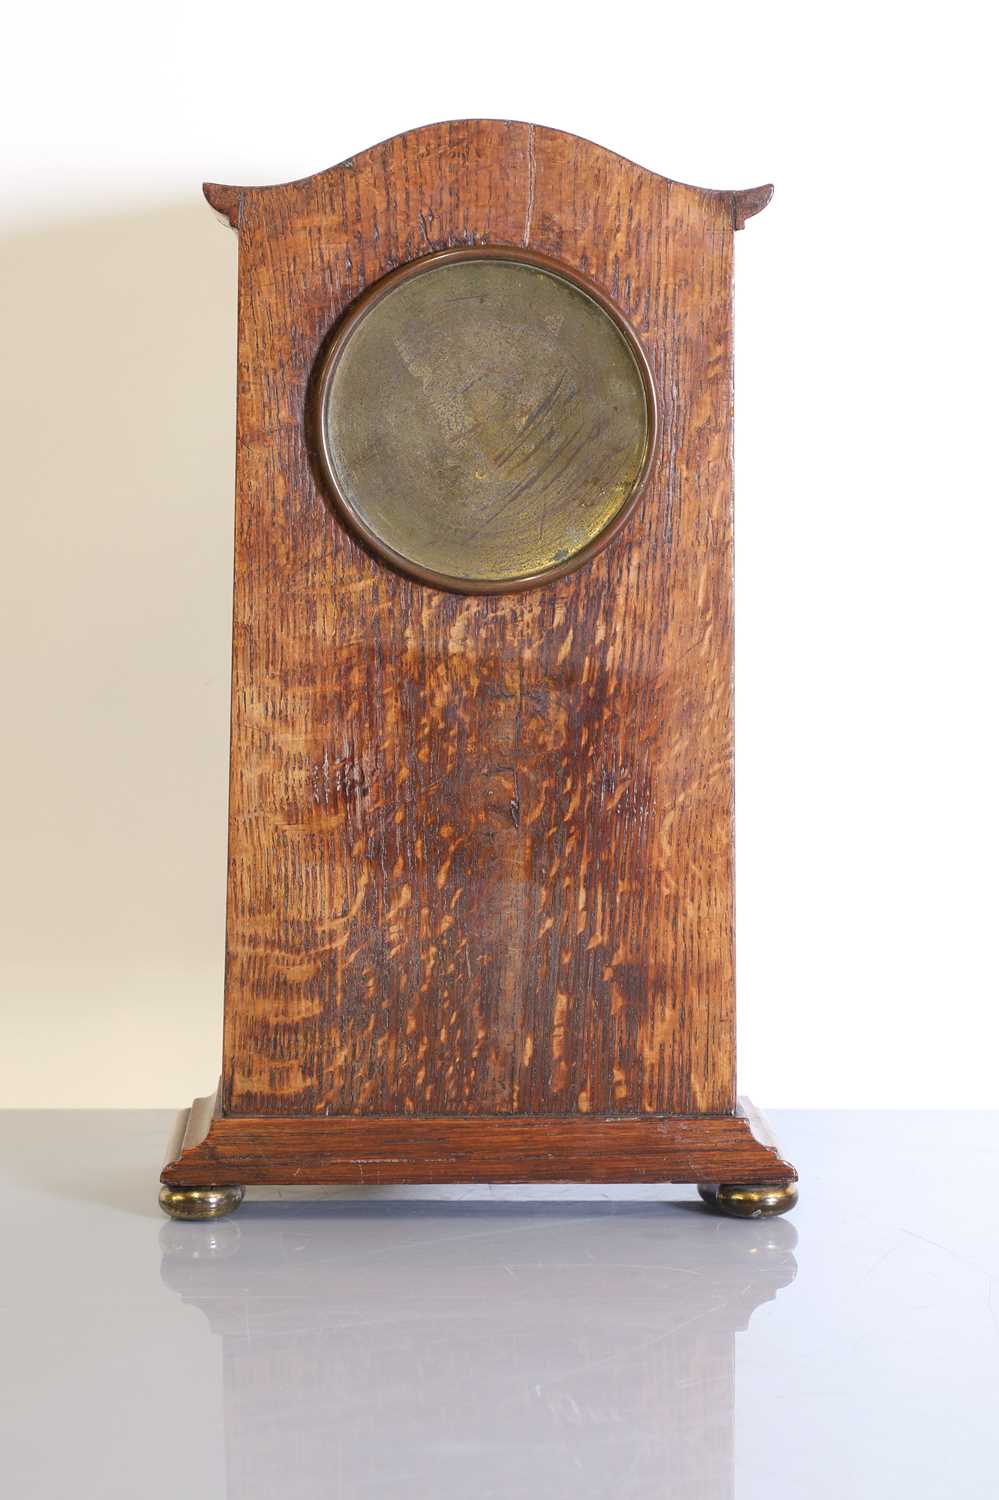 An oak-inlaid and pewter-mounted mantel clock, - Image 4 of 4